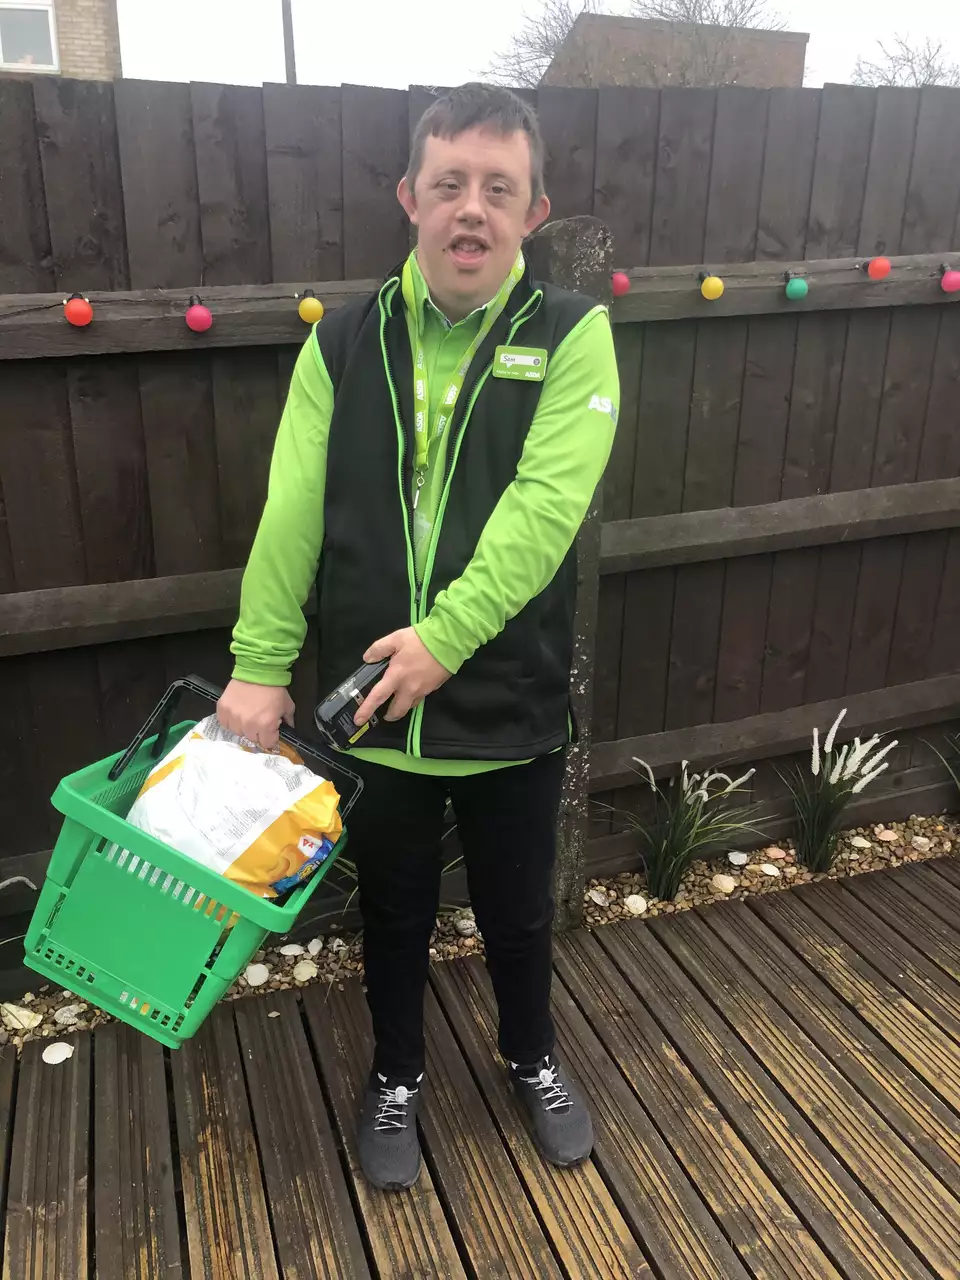 Sam Pierce shows his support for key workers at Asda Swindon Haydon